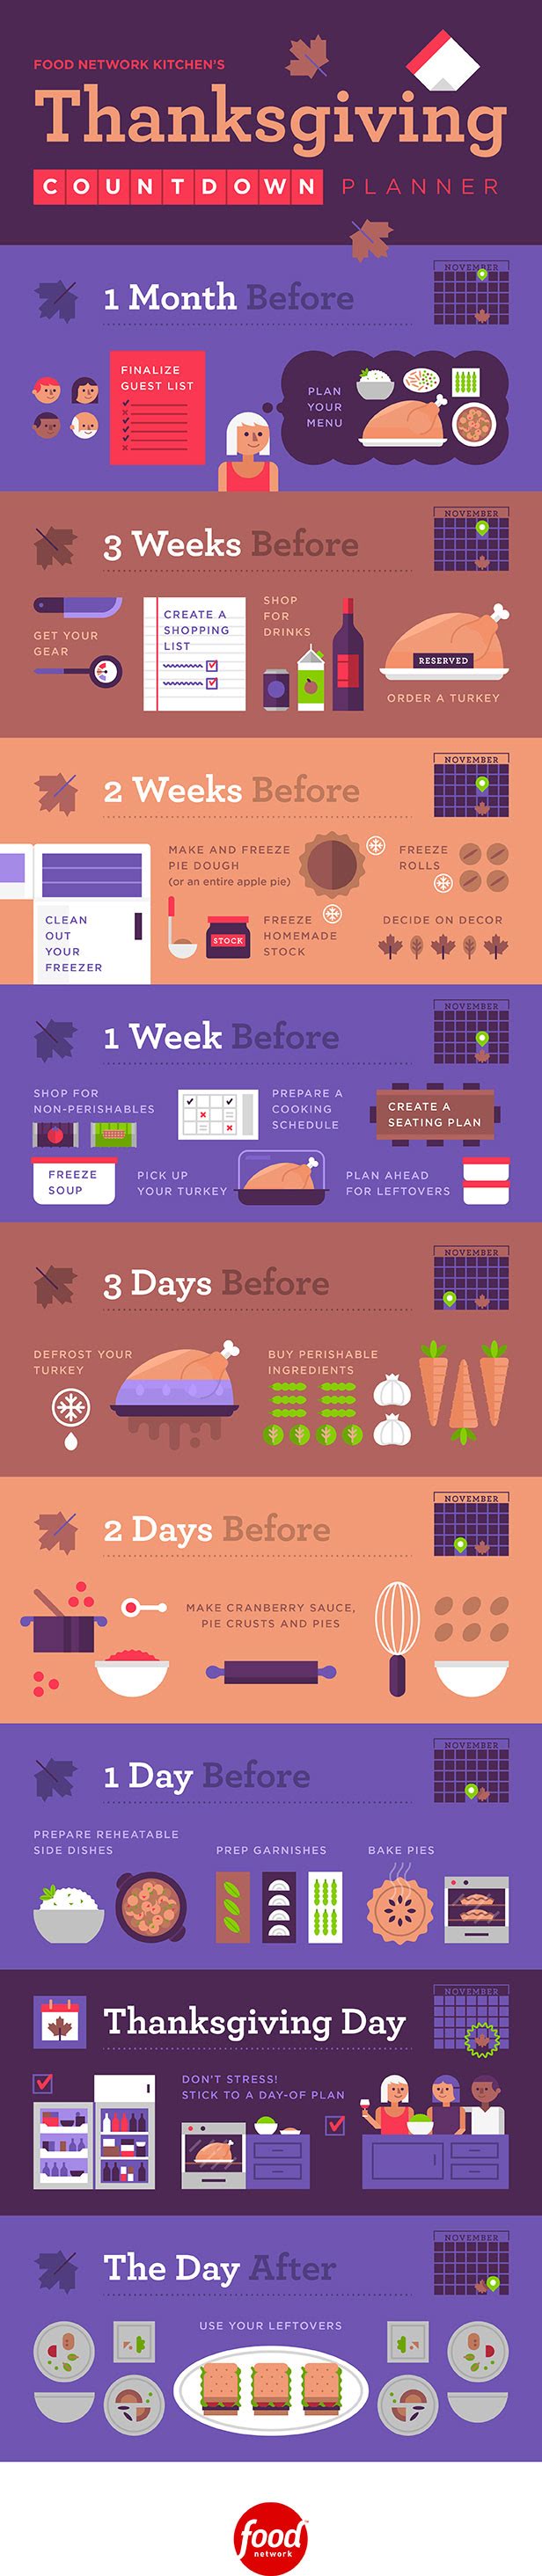 Guide To Thanksgiving Countdown Planner #infographic